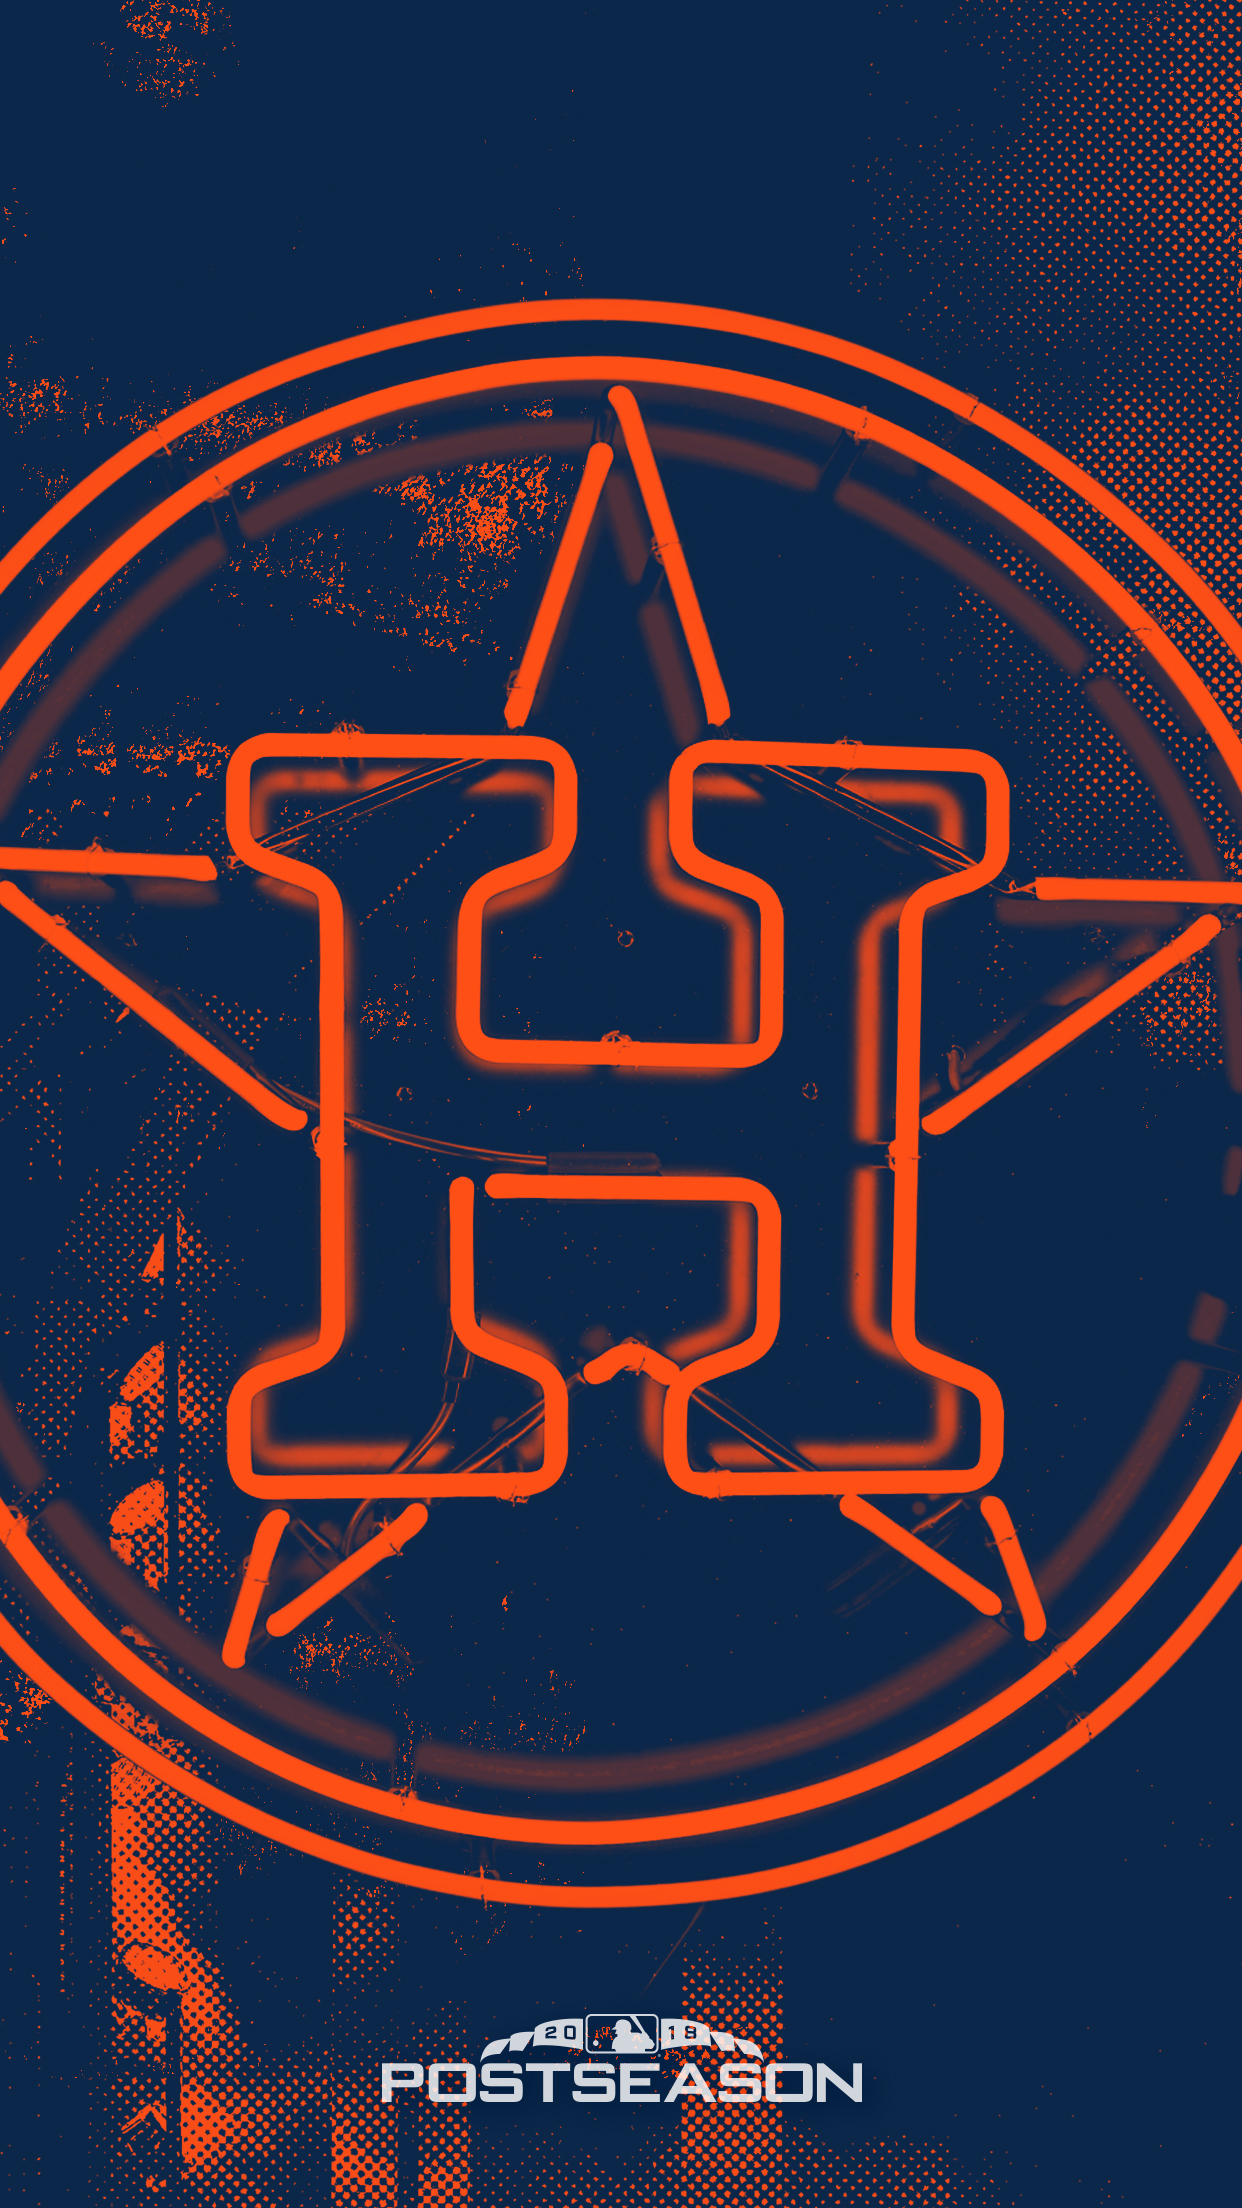 Houston Astros Wallpaper Mlb (image in Collection)